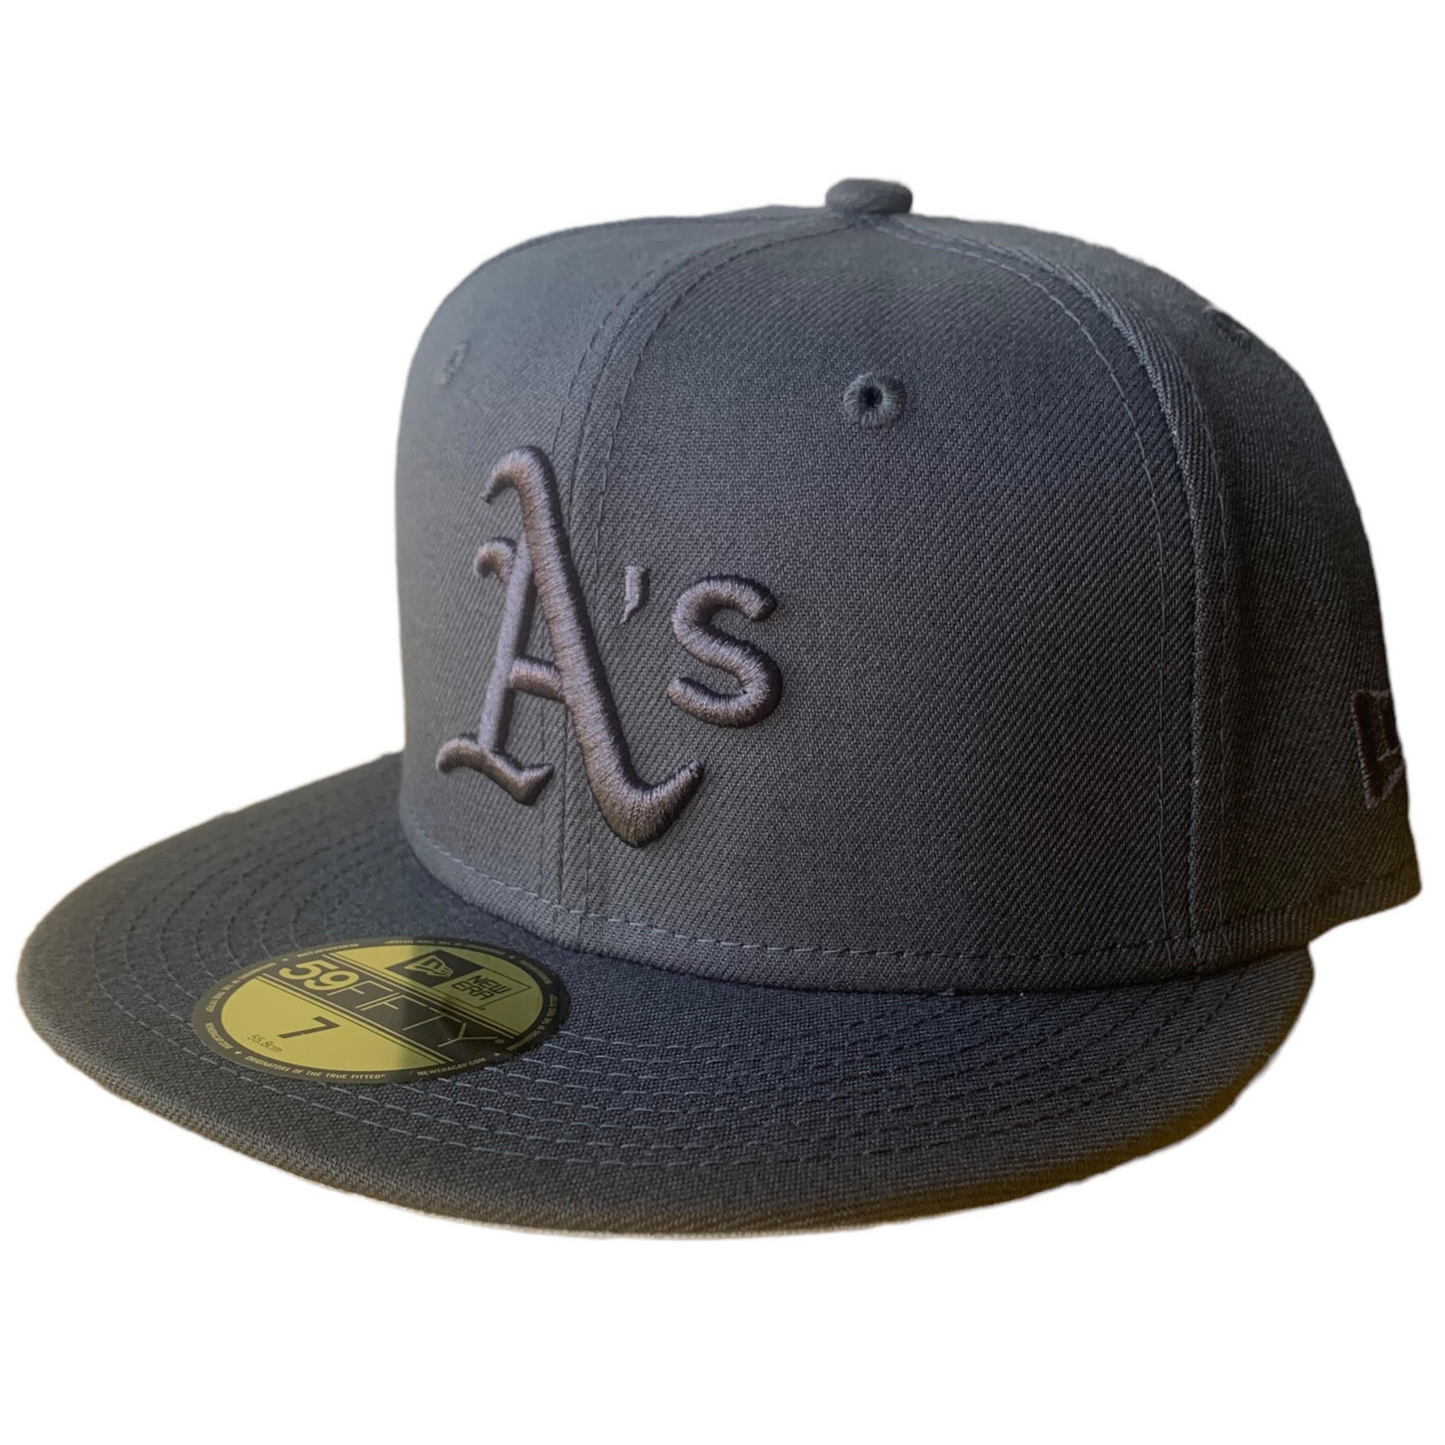 OAKLAND ATHLETICS COLOR PACK 59FIFTY FITTED HAT - GRAPHITE